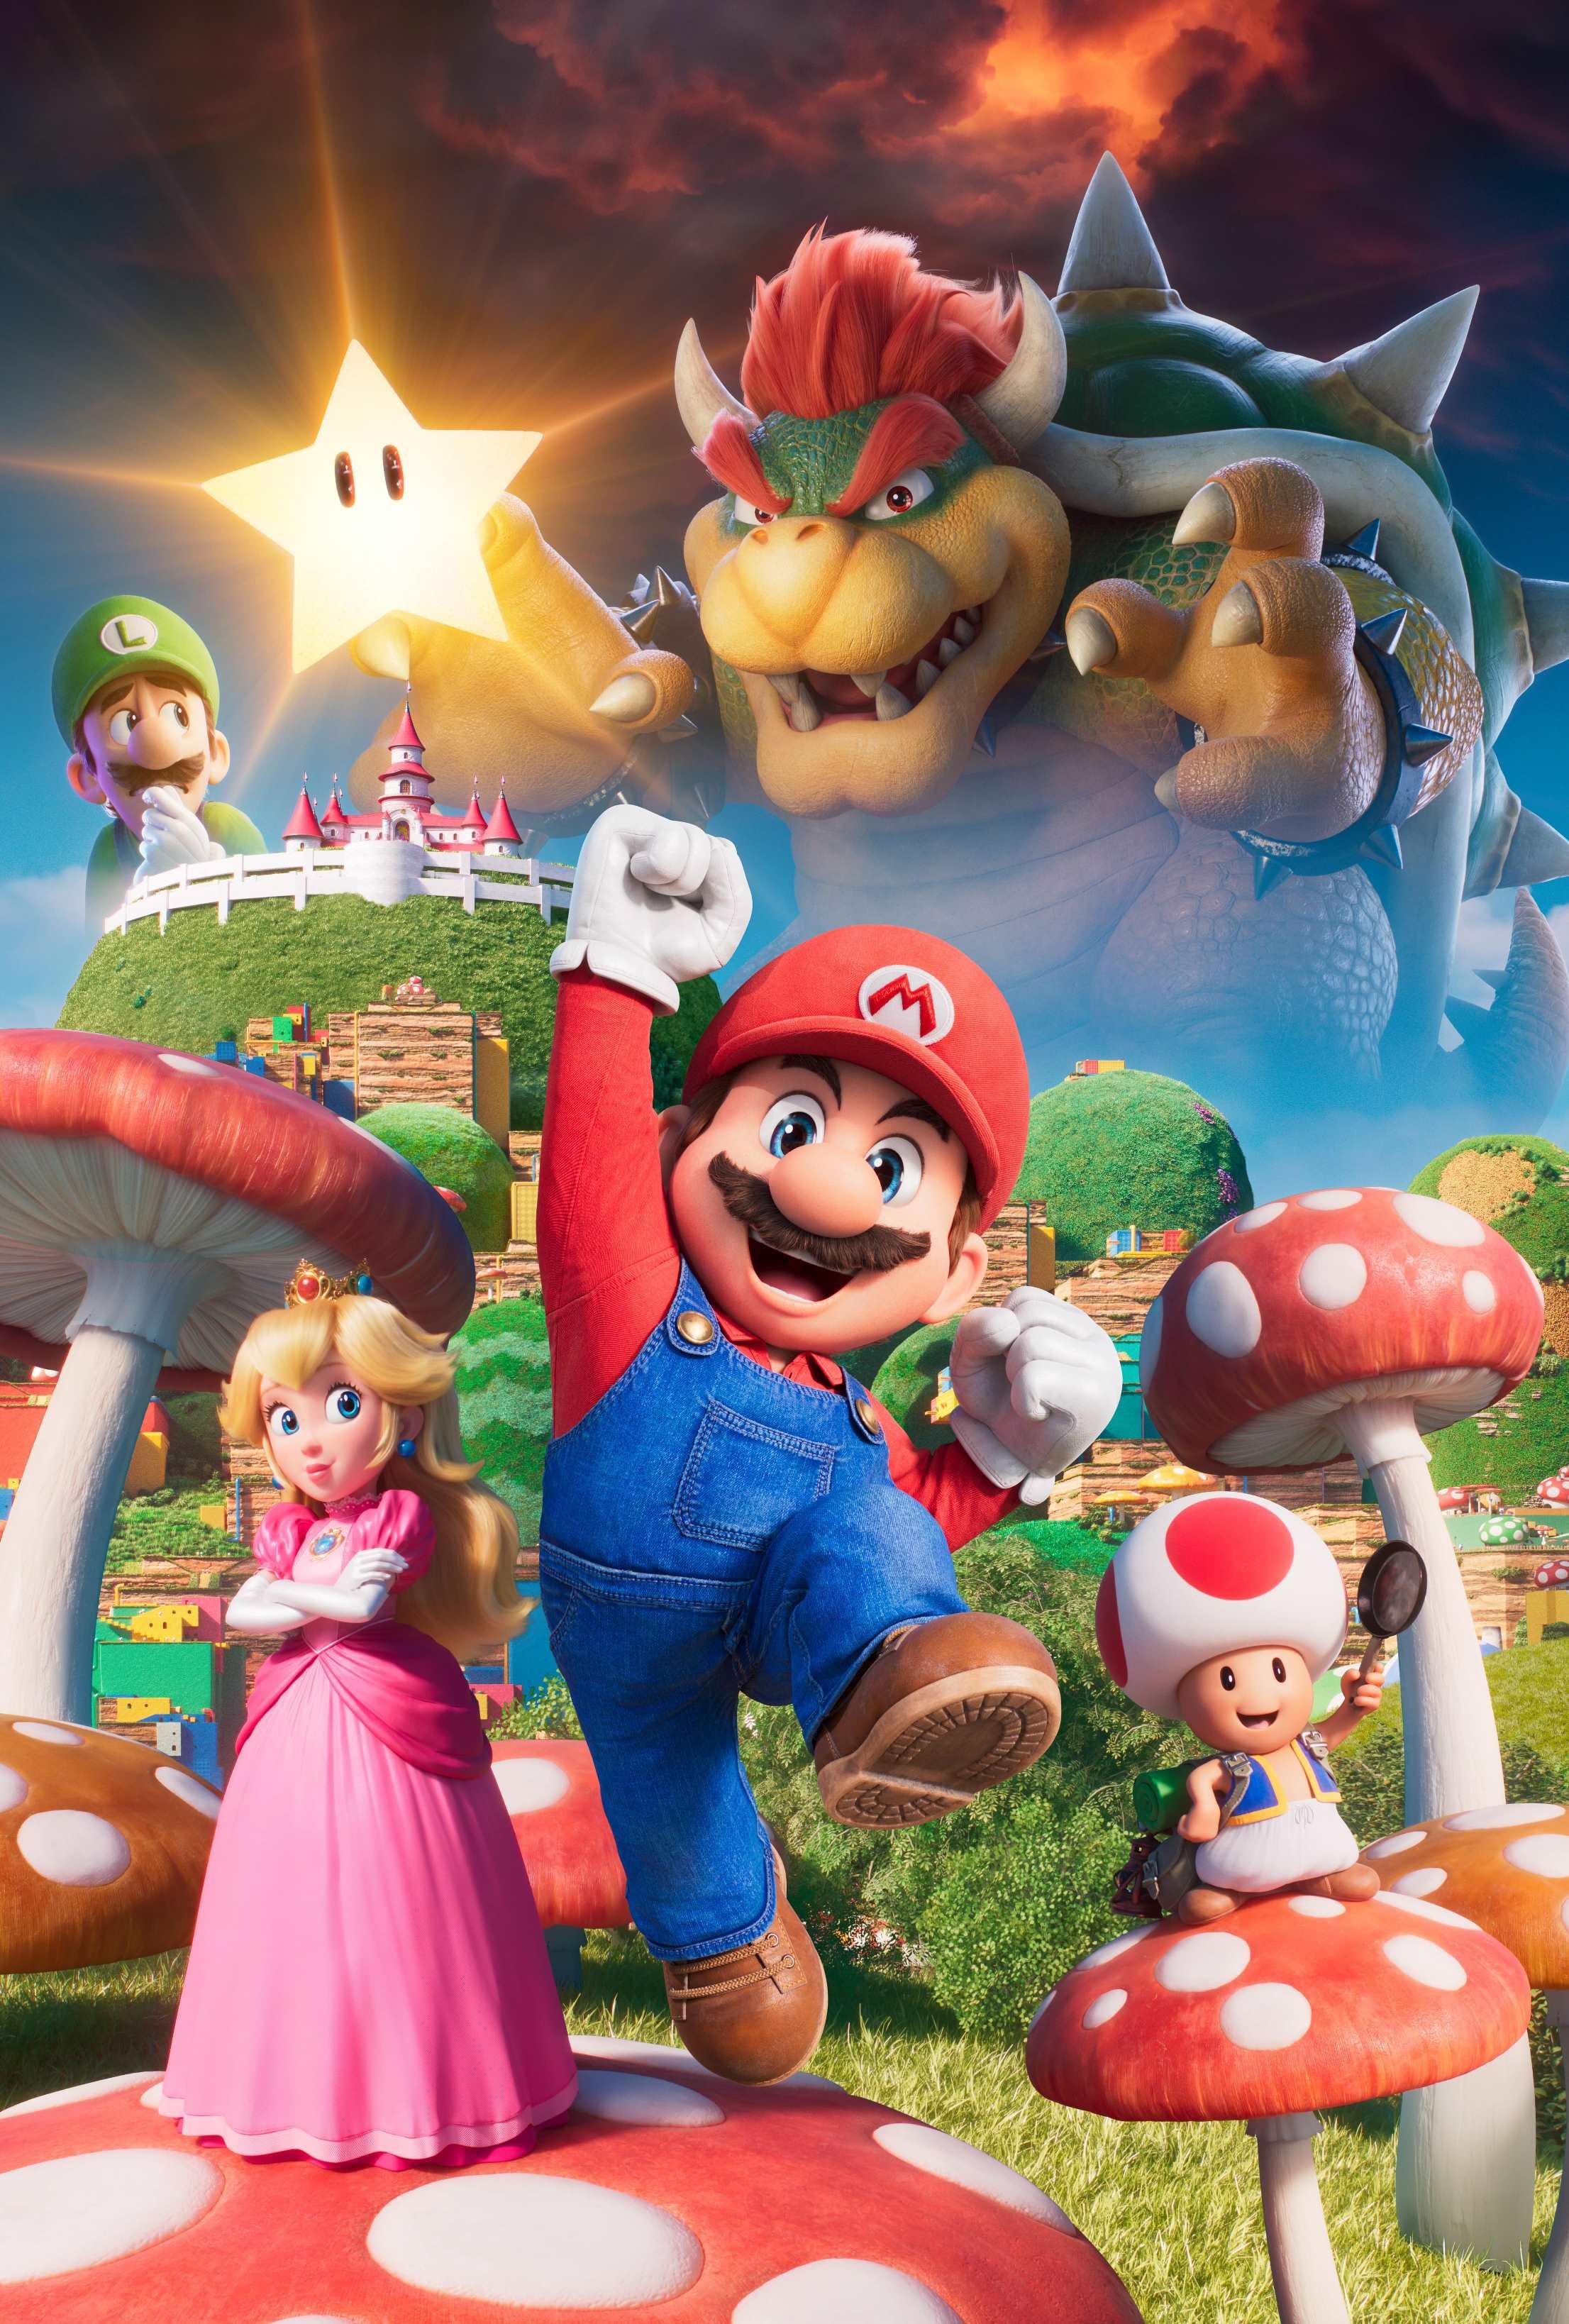 Lots Of Posters And Image For The Super Mario Bros Movie Leaked